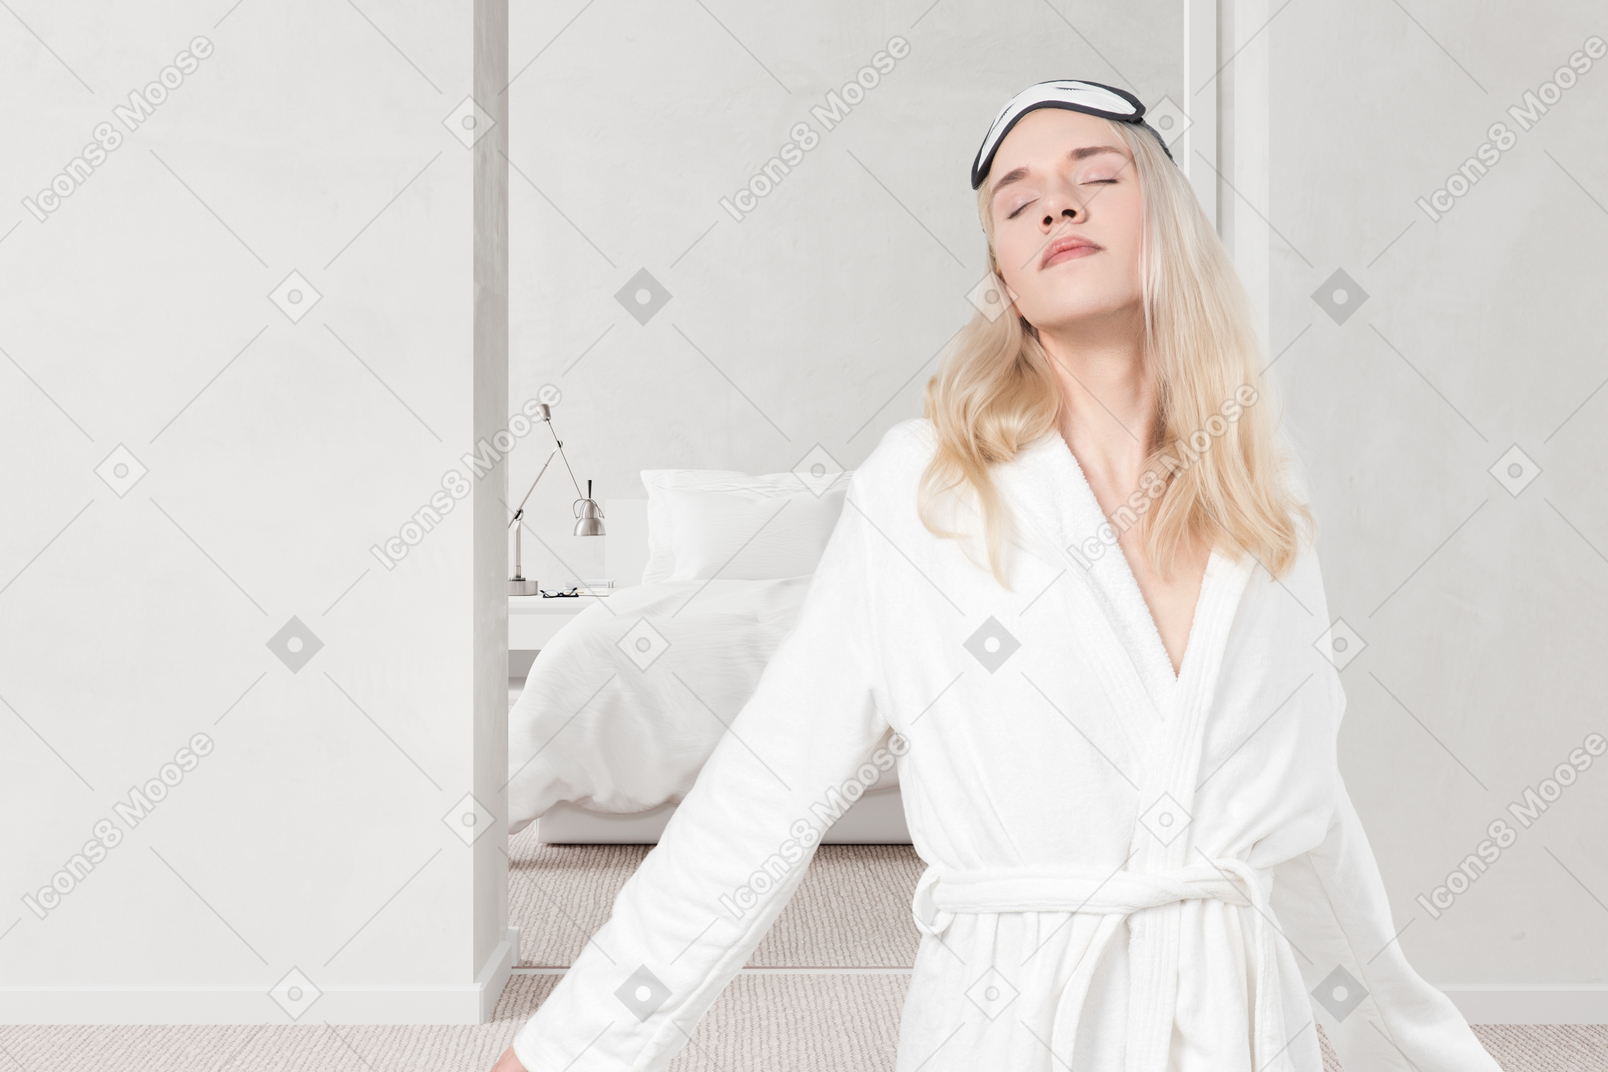 A woman in a white bathrobe standing in front of a mirror